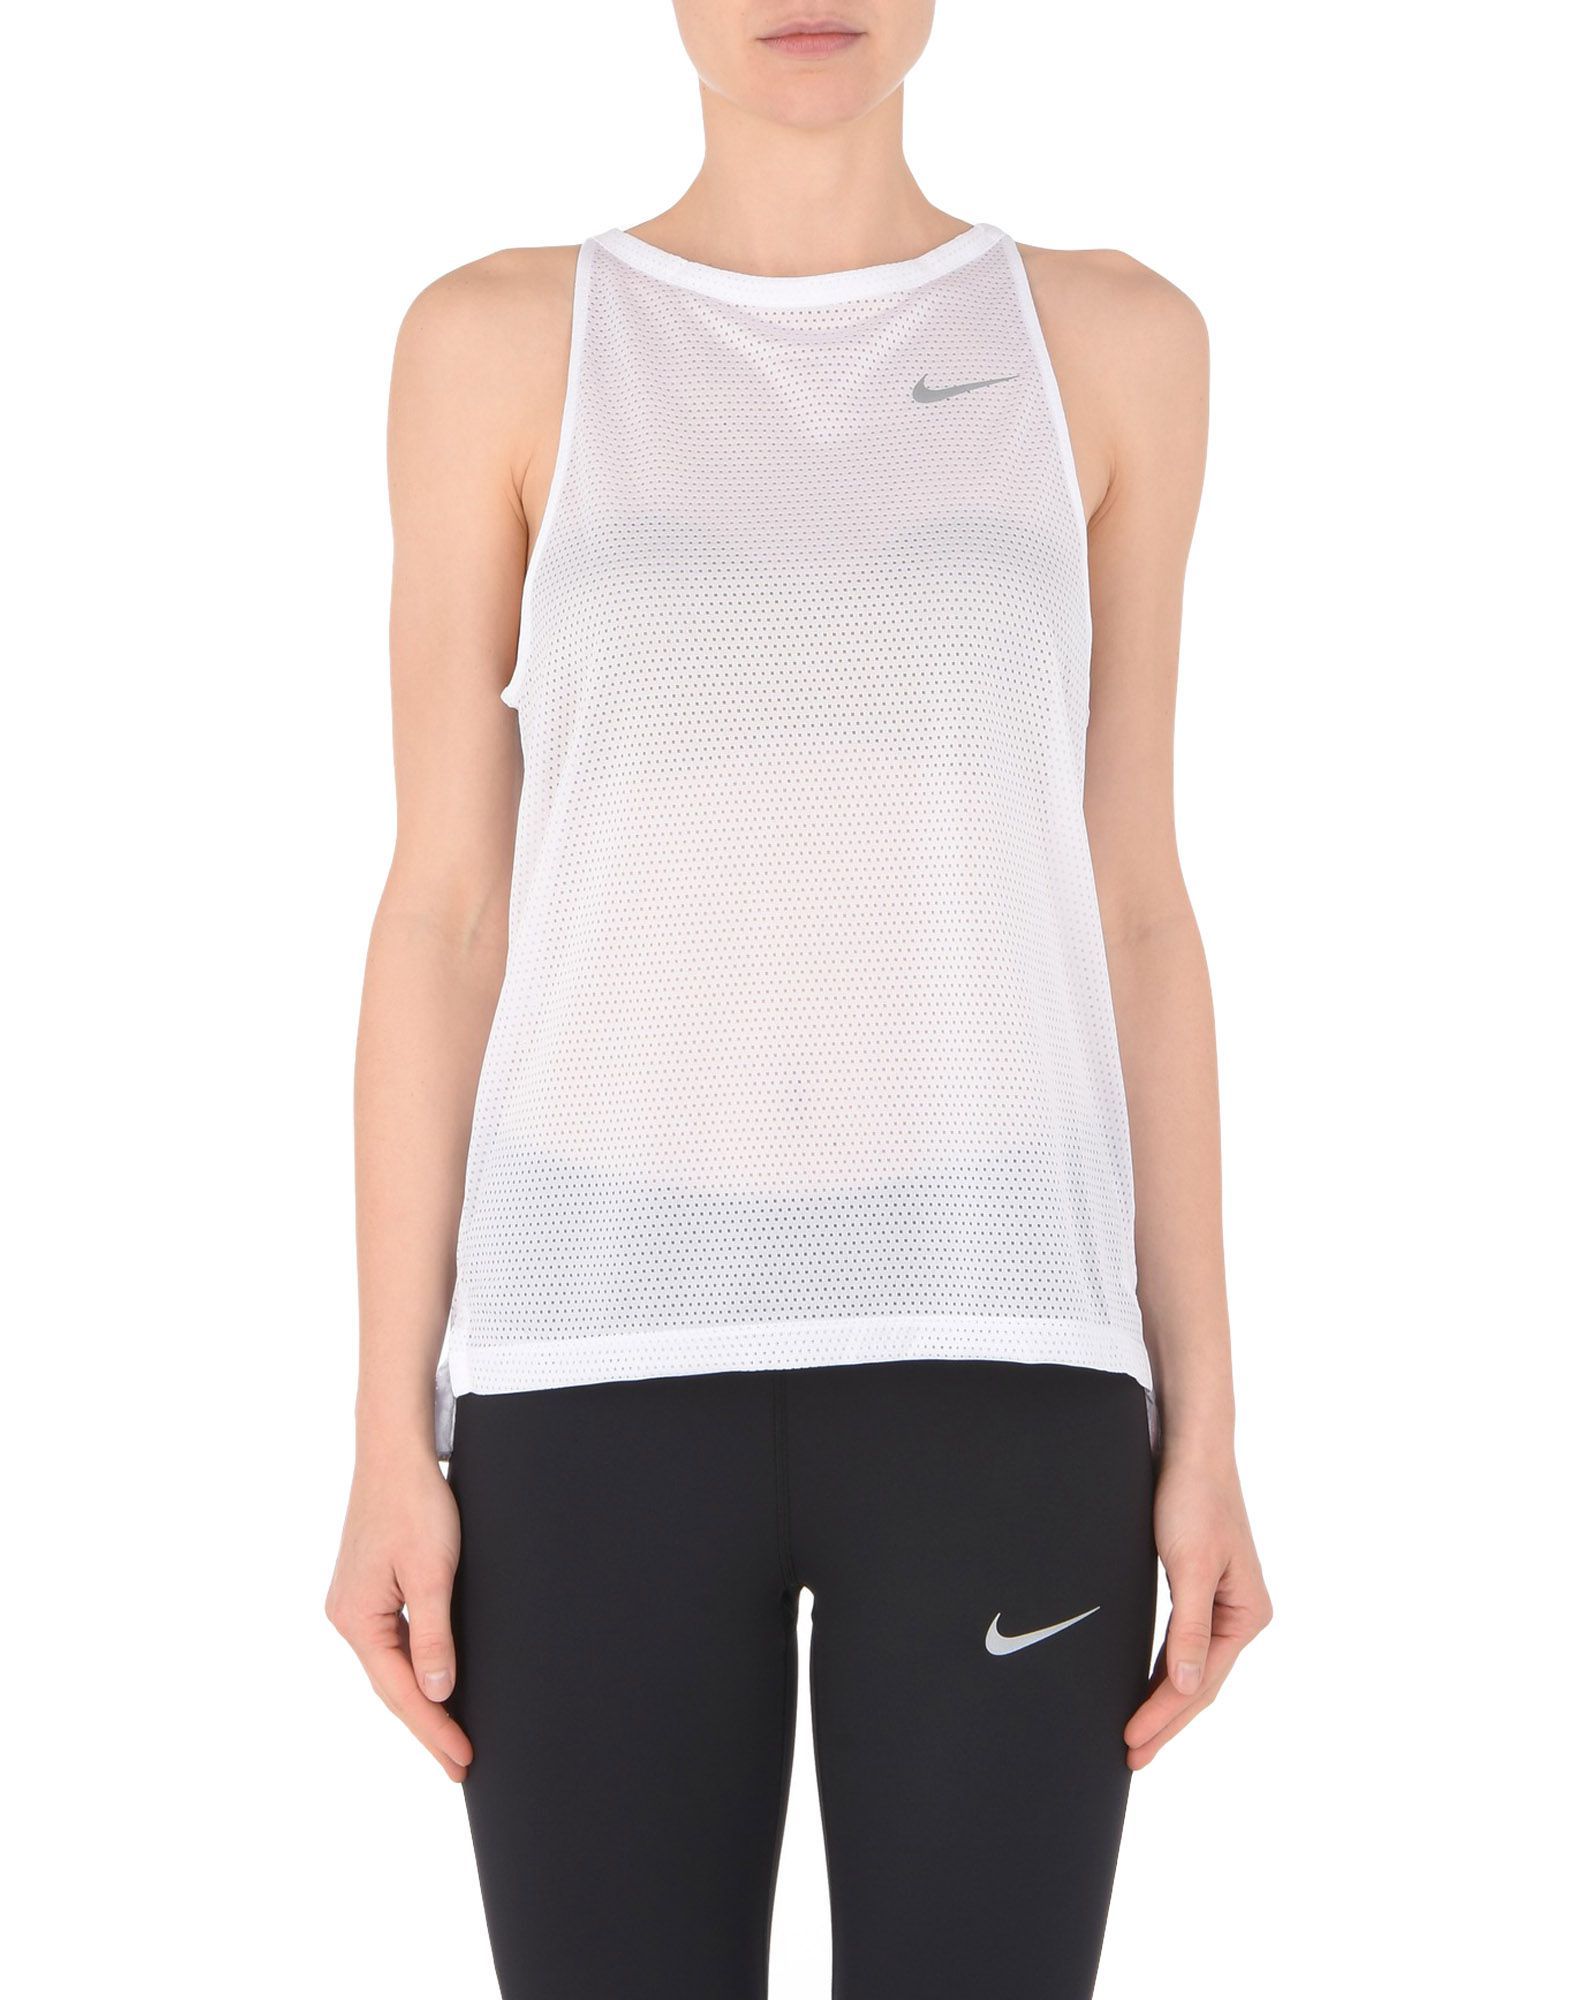 synthetic jersey, basic solid color, wide neckline, sleeveless, breathable fabric, logo, running